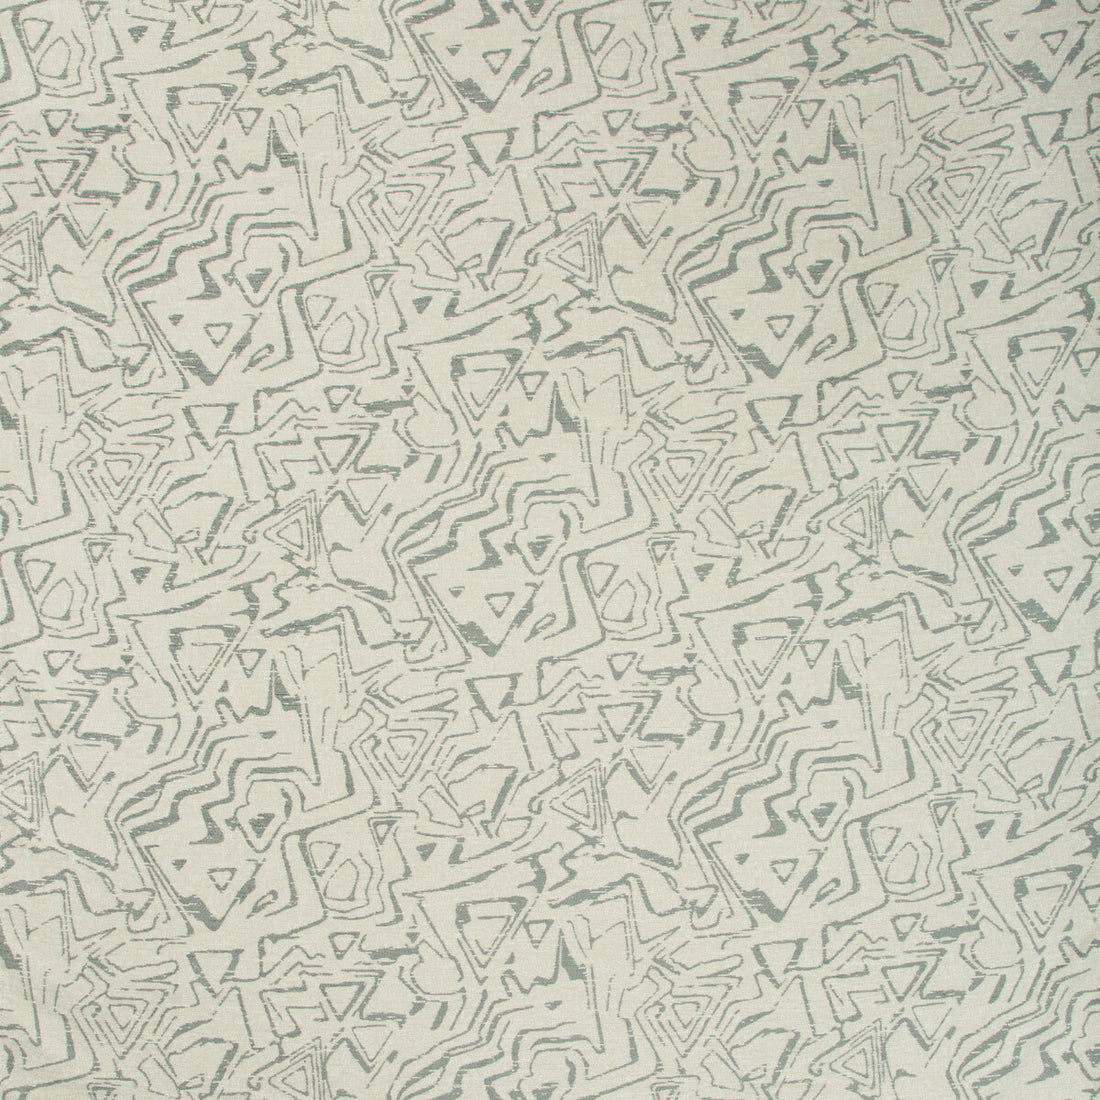 Kravet Contract fabric in 35030-11 color - pattern 35030.11.0 - by Kravet Contract in the Incase Crypton Gis collection